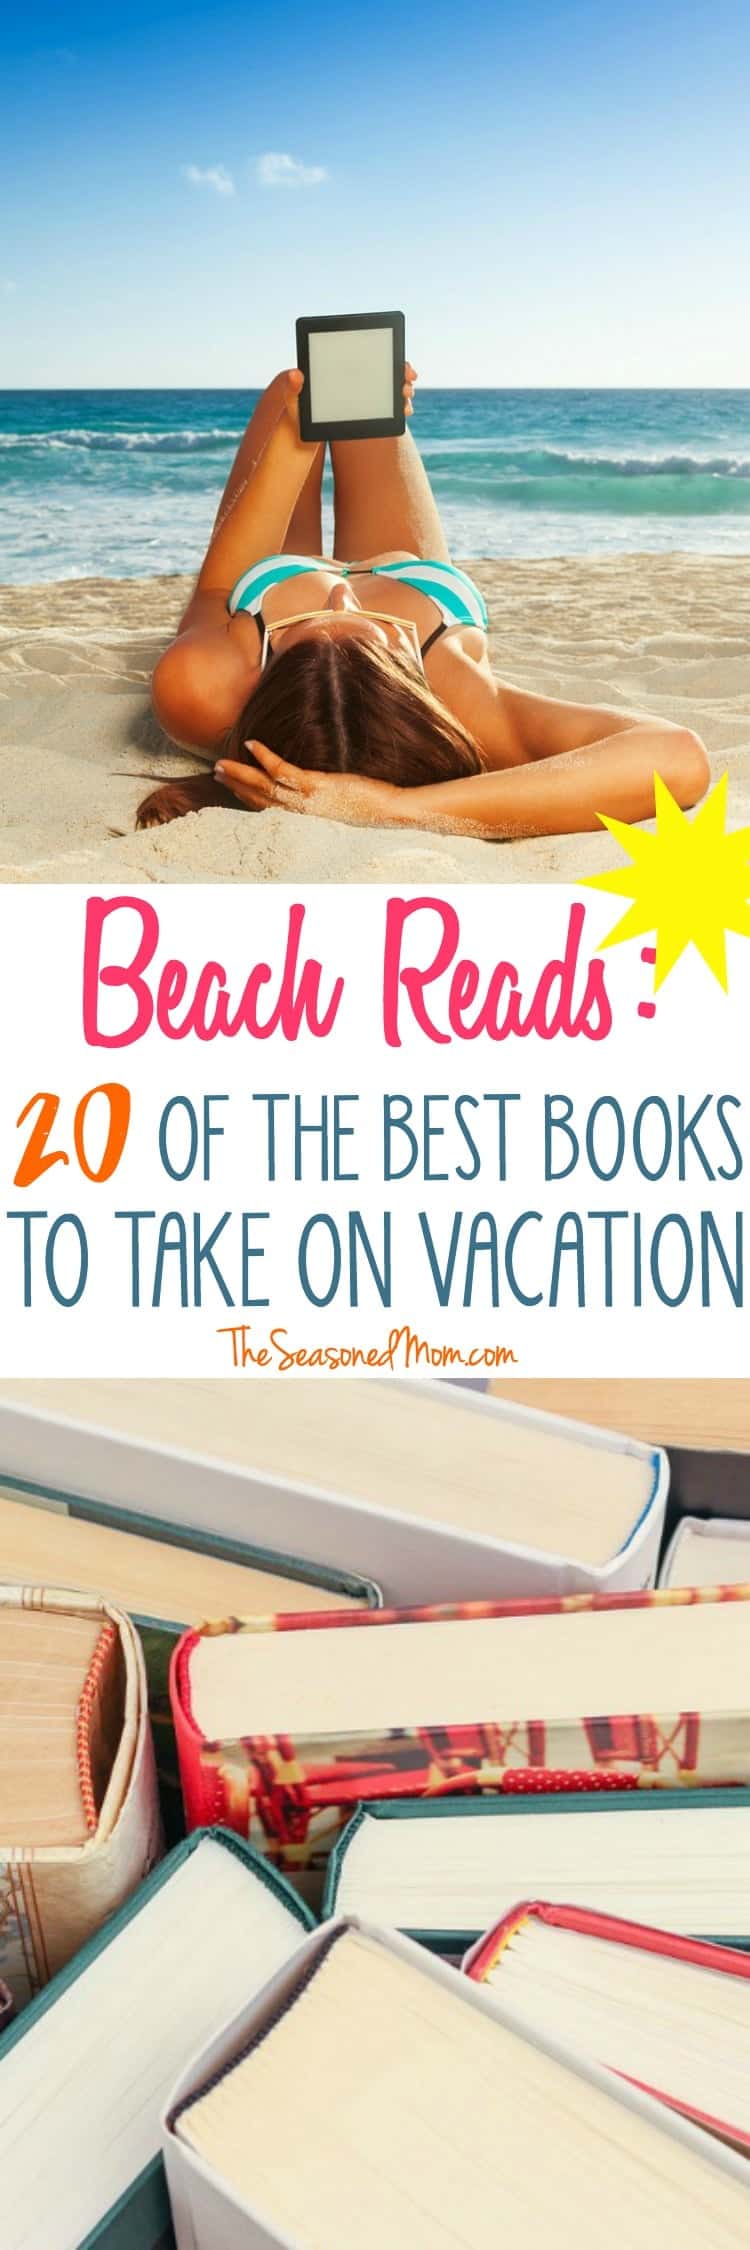 Beach Reads: 20 of the Best Books to Take on Vacation!